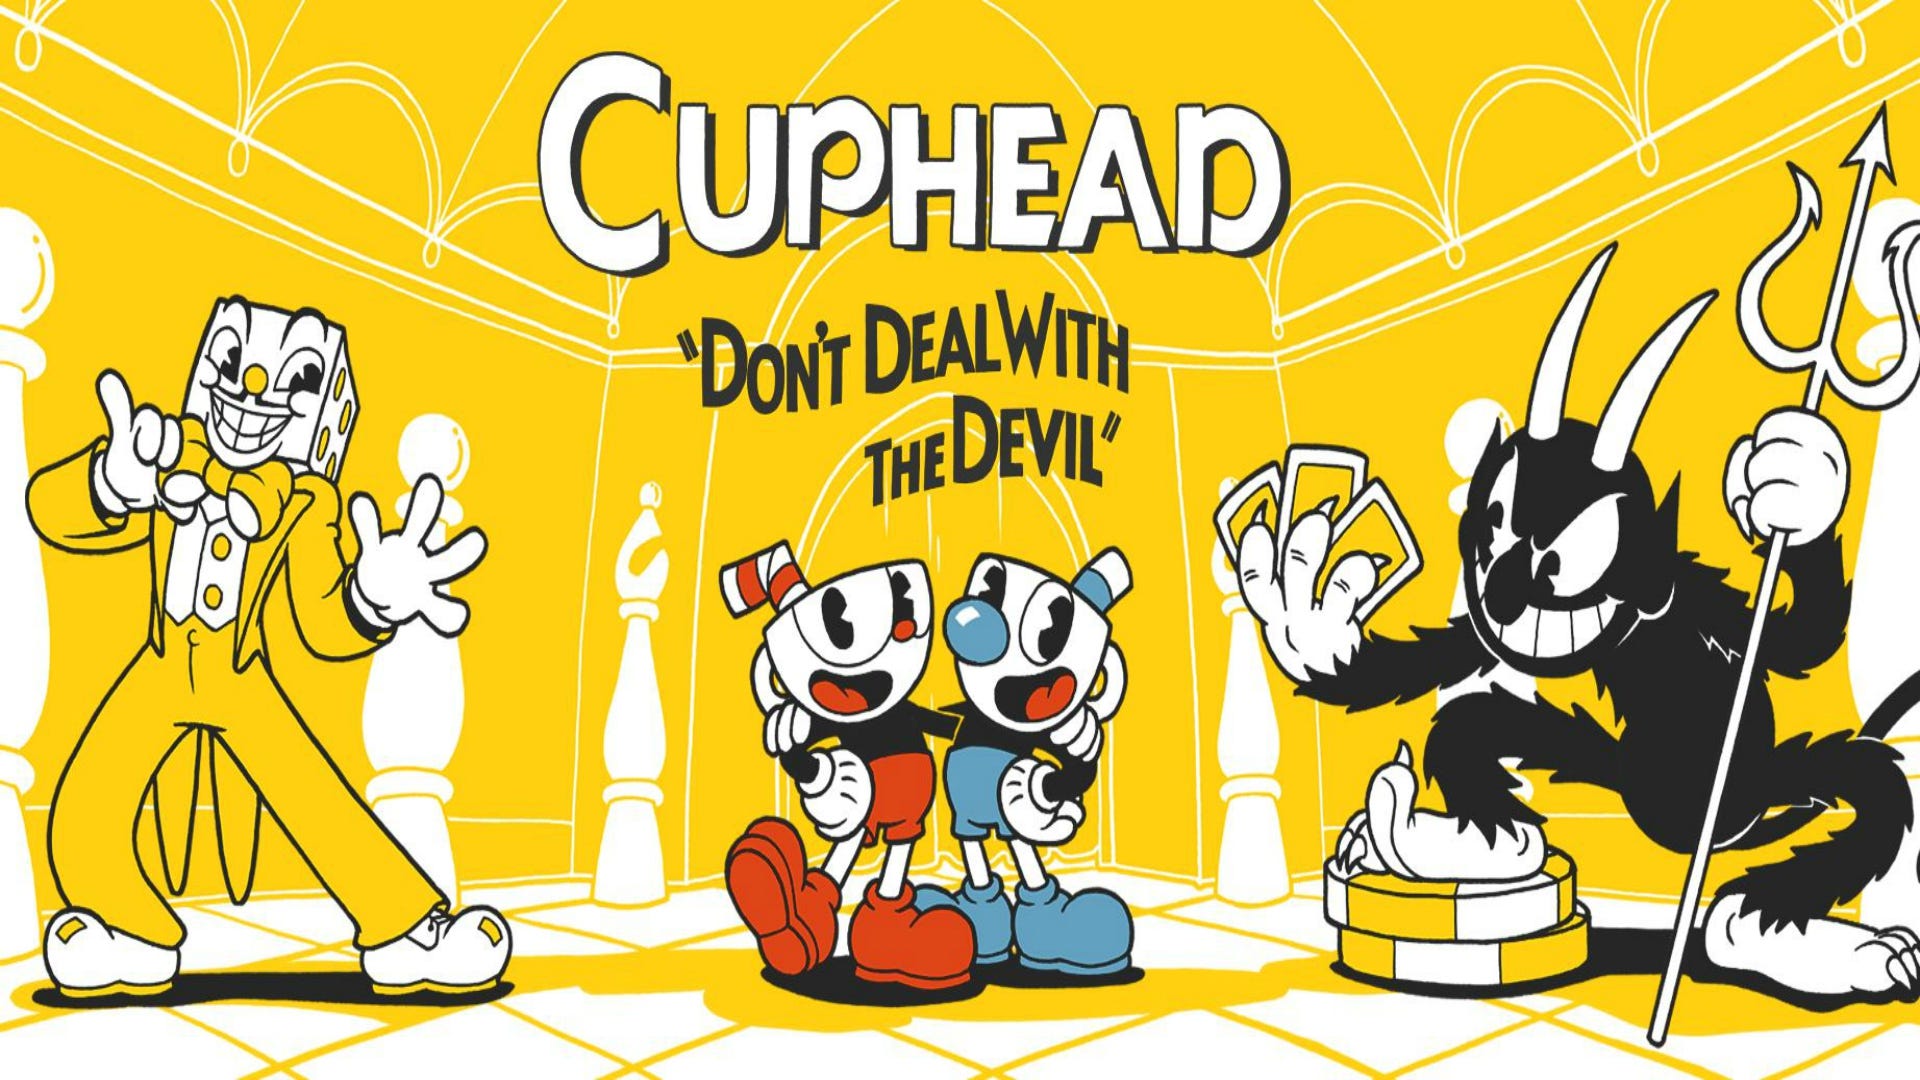 900+ Best Devil and king dice ideas  deal with the devil, devil, cuphead  game